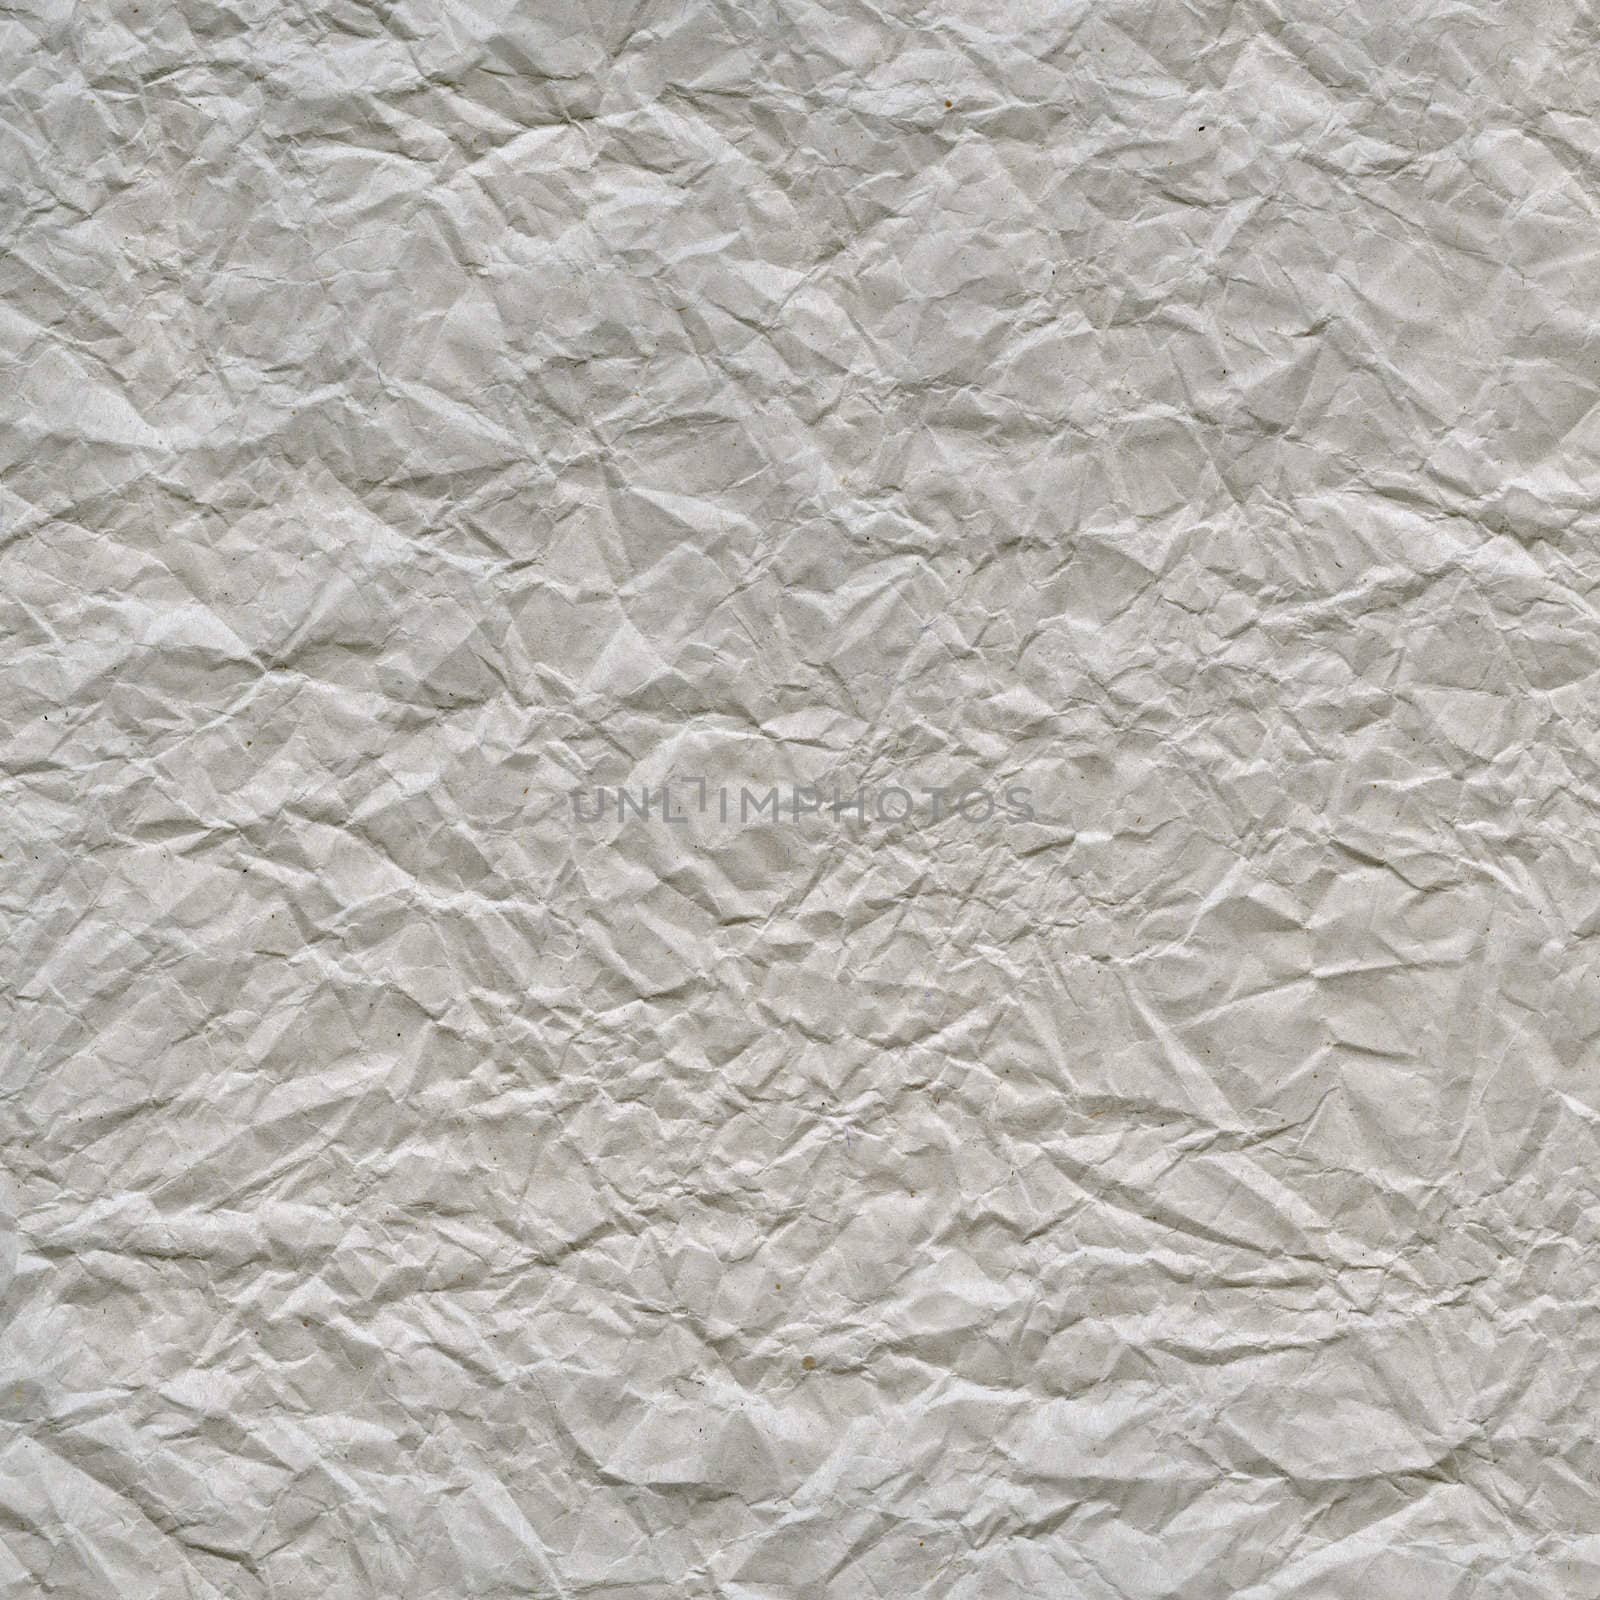 thick gray crumpled and wrinkled  packing paper background